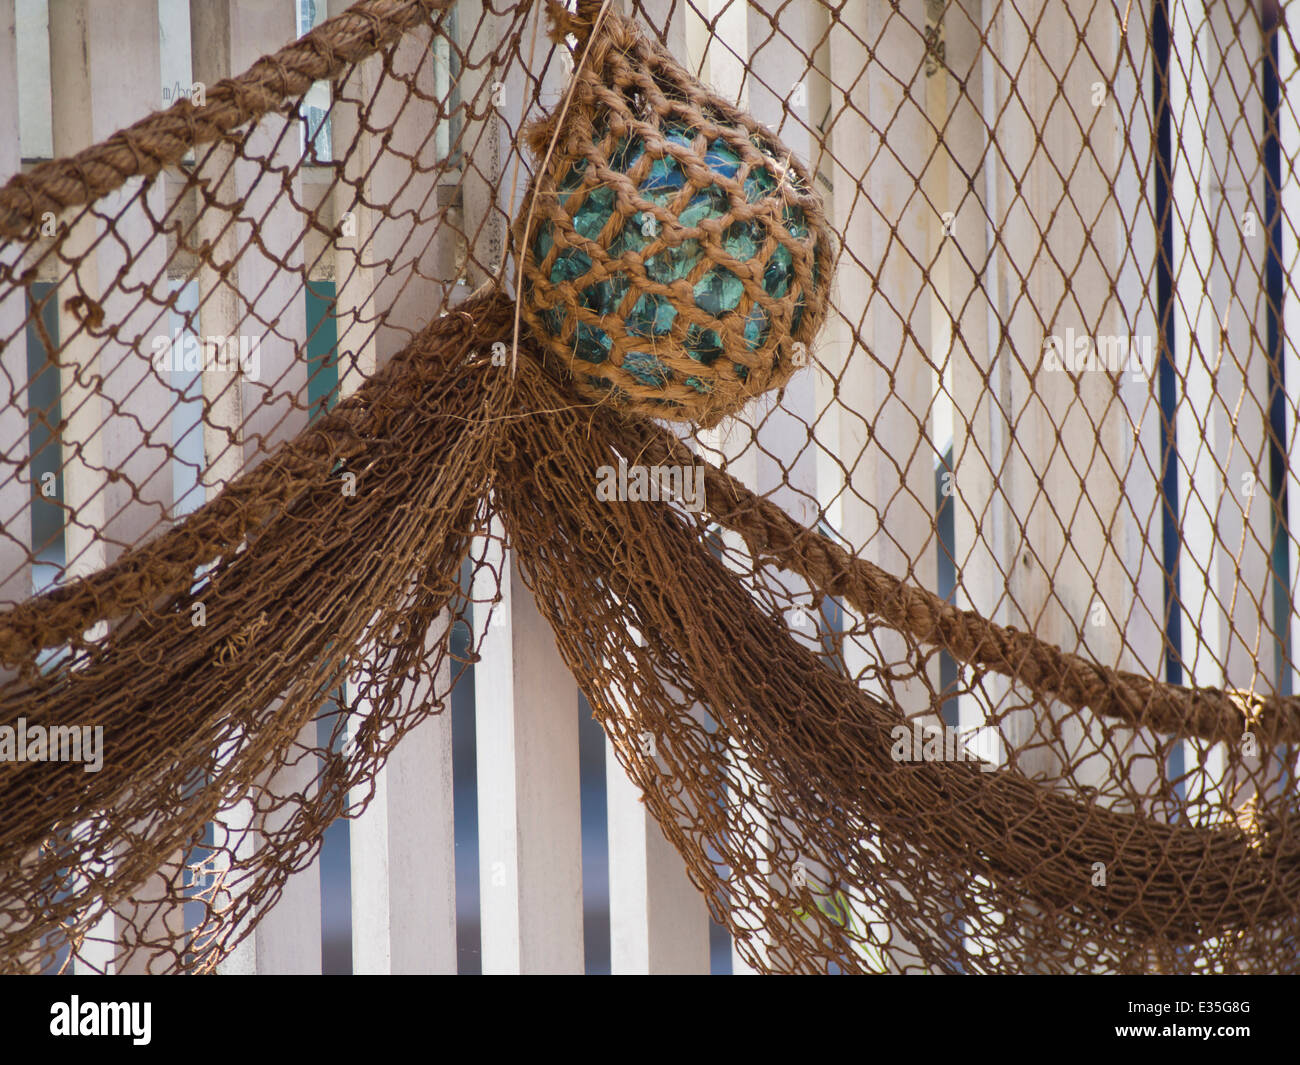 https://c8.alamy.com/comp/E35G8G/glass-float-and-fishing-net-on-a-picket-fence-rustic-decoration-in-E35G8G.jpg